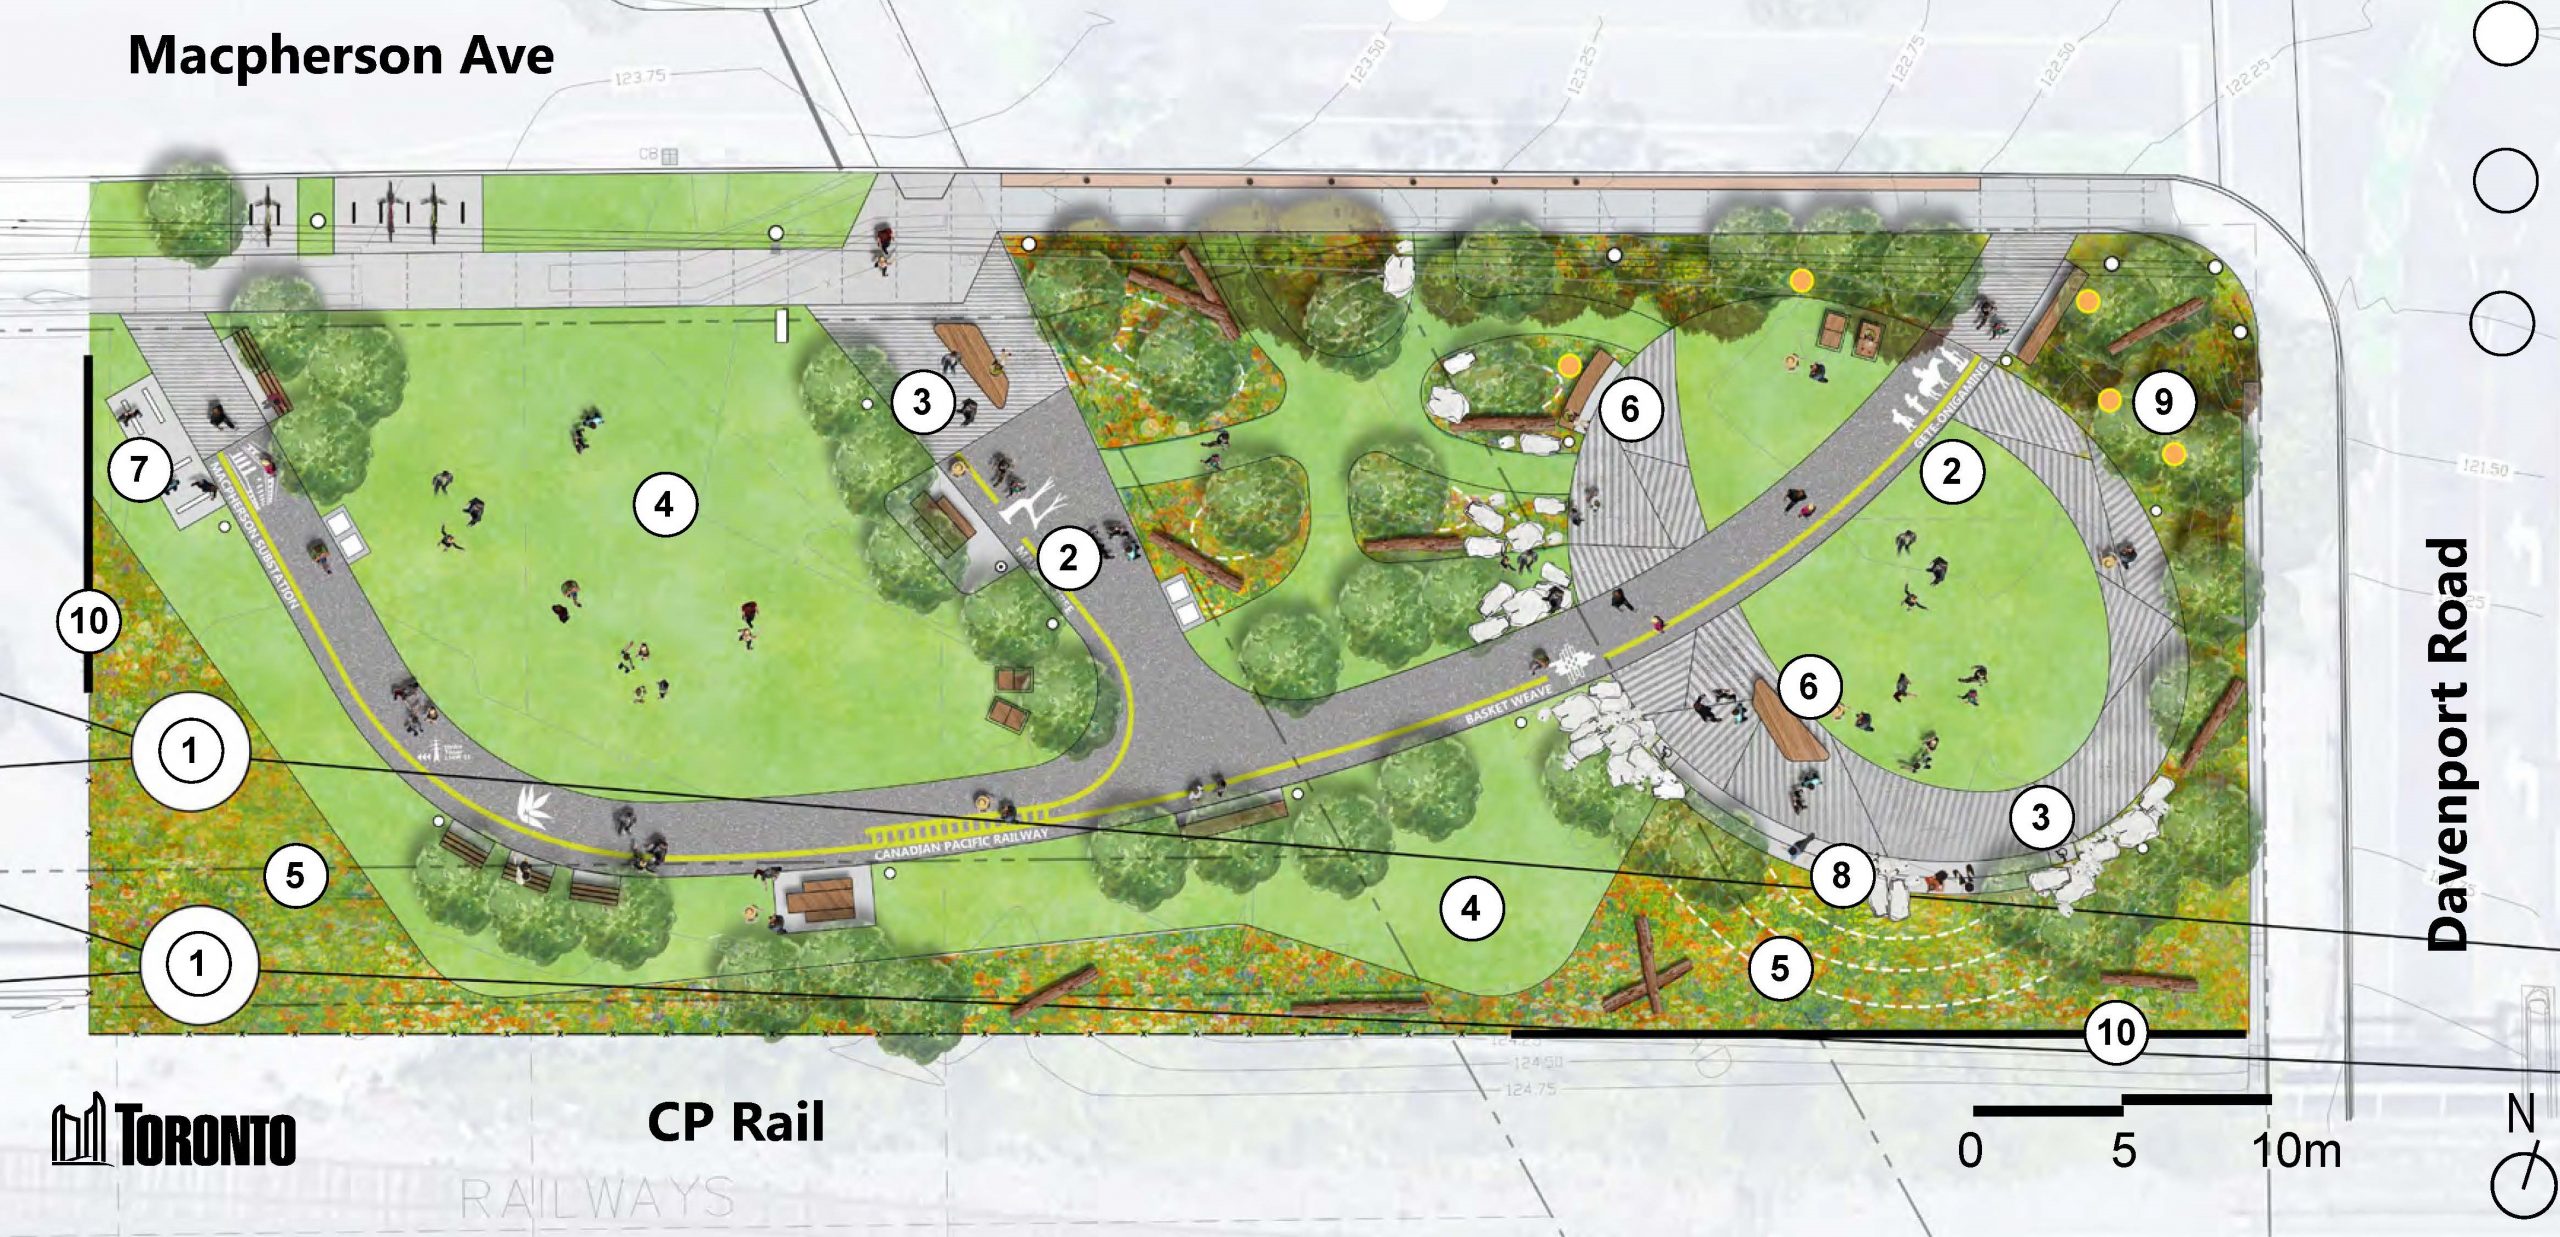 The preferred plan for the new park, with numbered labels indicating the features and their location in the new park. From left to right, there is a fence, fitness equipment, a meadow, a long pathway connecting the park from Macpherson Avenue and Davenport Road, with pockets of open lawn space and seating along the pathways, including benches, an amphitheatre near Davenport Road and a main park entrance at the corner of Macpherson Avenue and Davenport Road. 